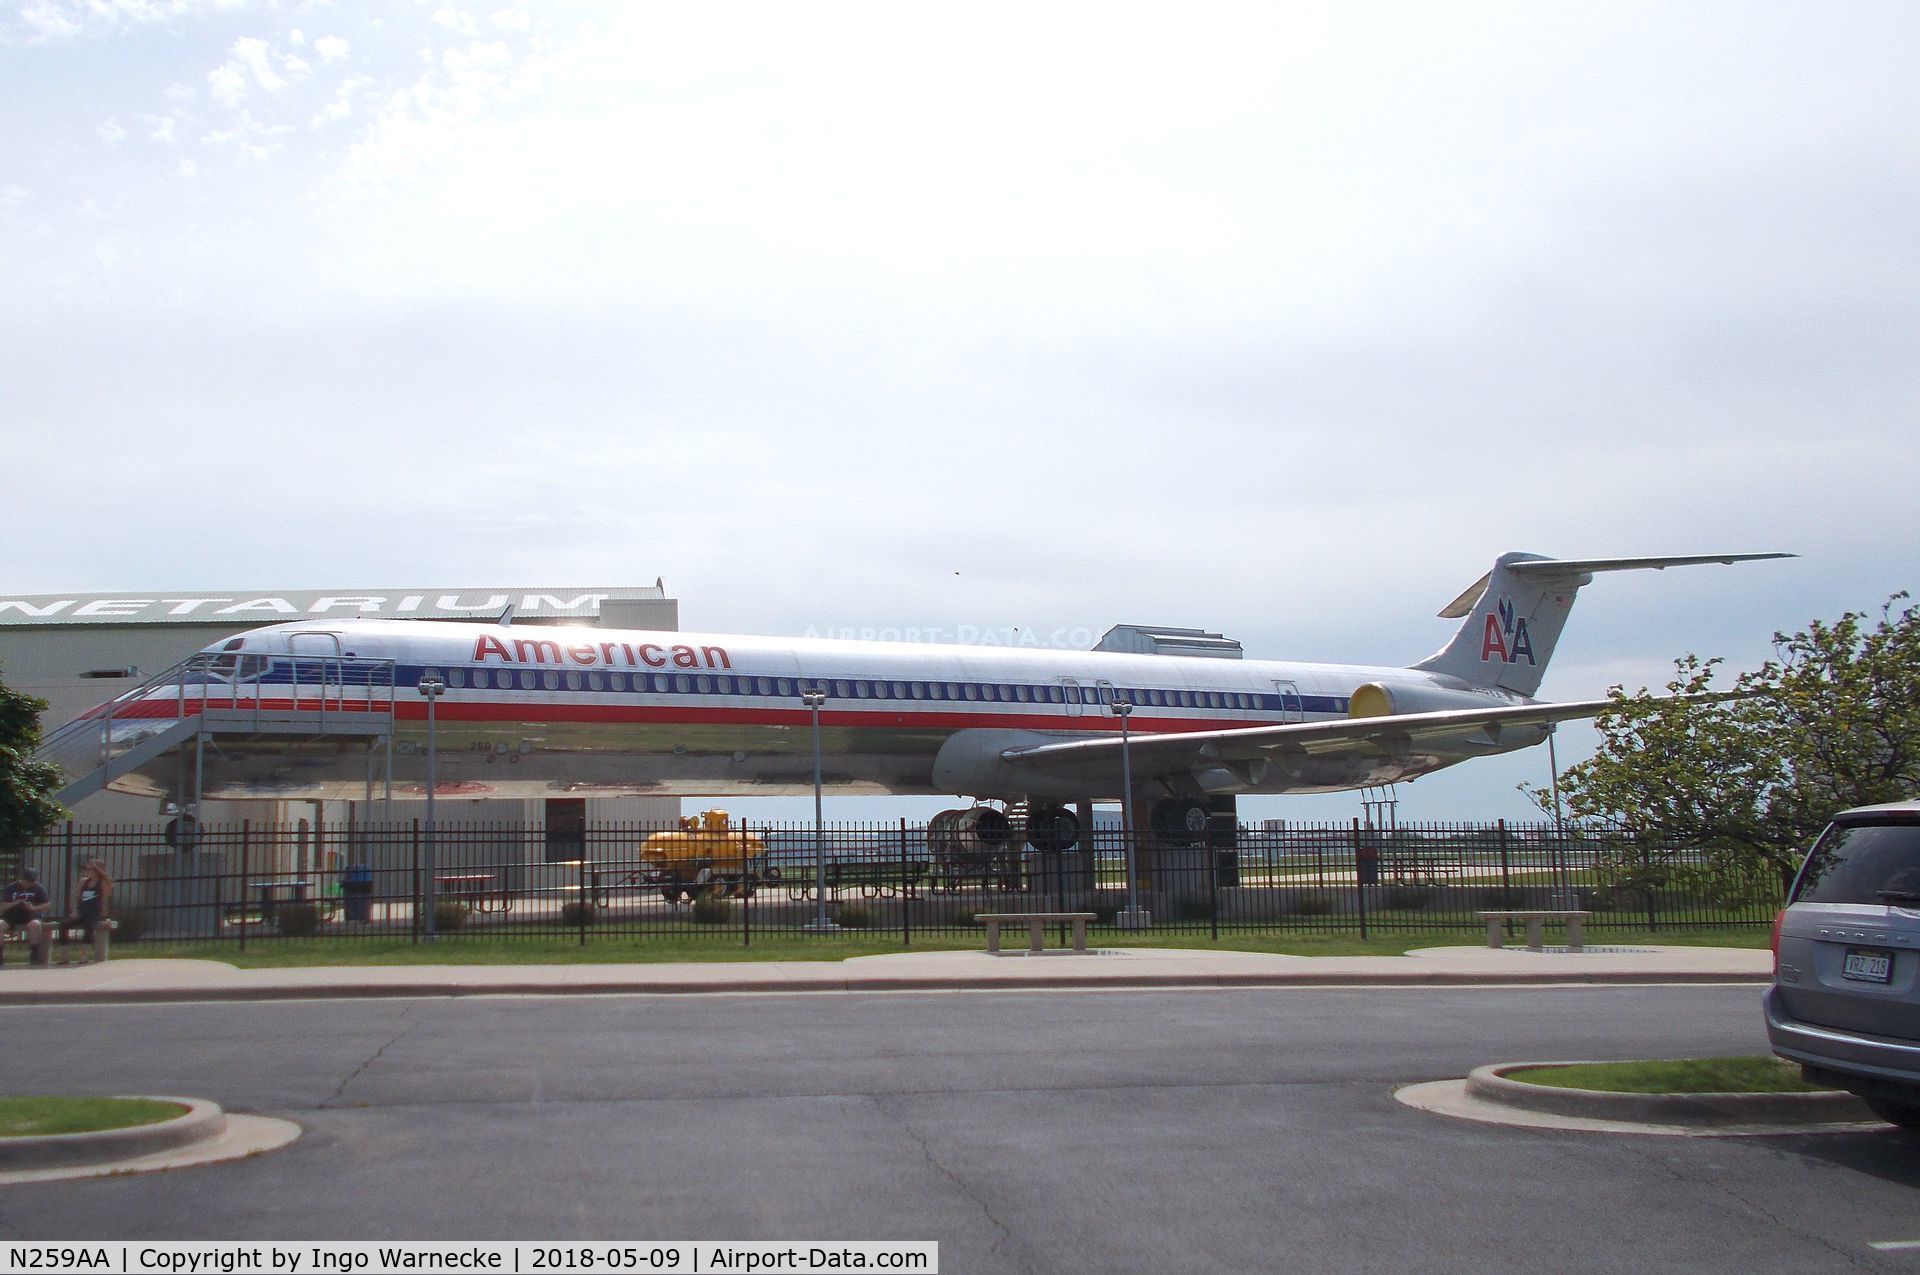 N259AA, 1985 McDonnell Douglas MD-82 (DC-9-82) C/N 49289, McDonnell Douglas MD-82 (DC-9-82) at the Tulsa Air and Space Museum, Tulsa OK